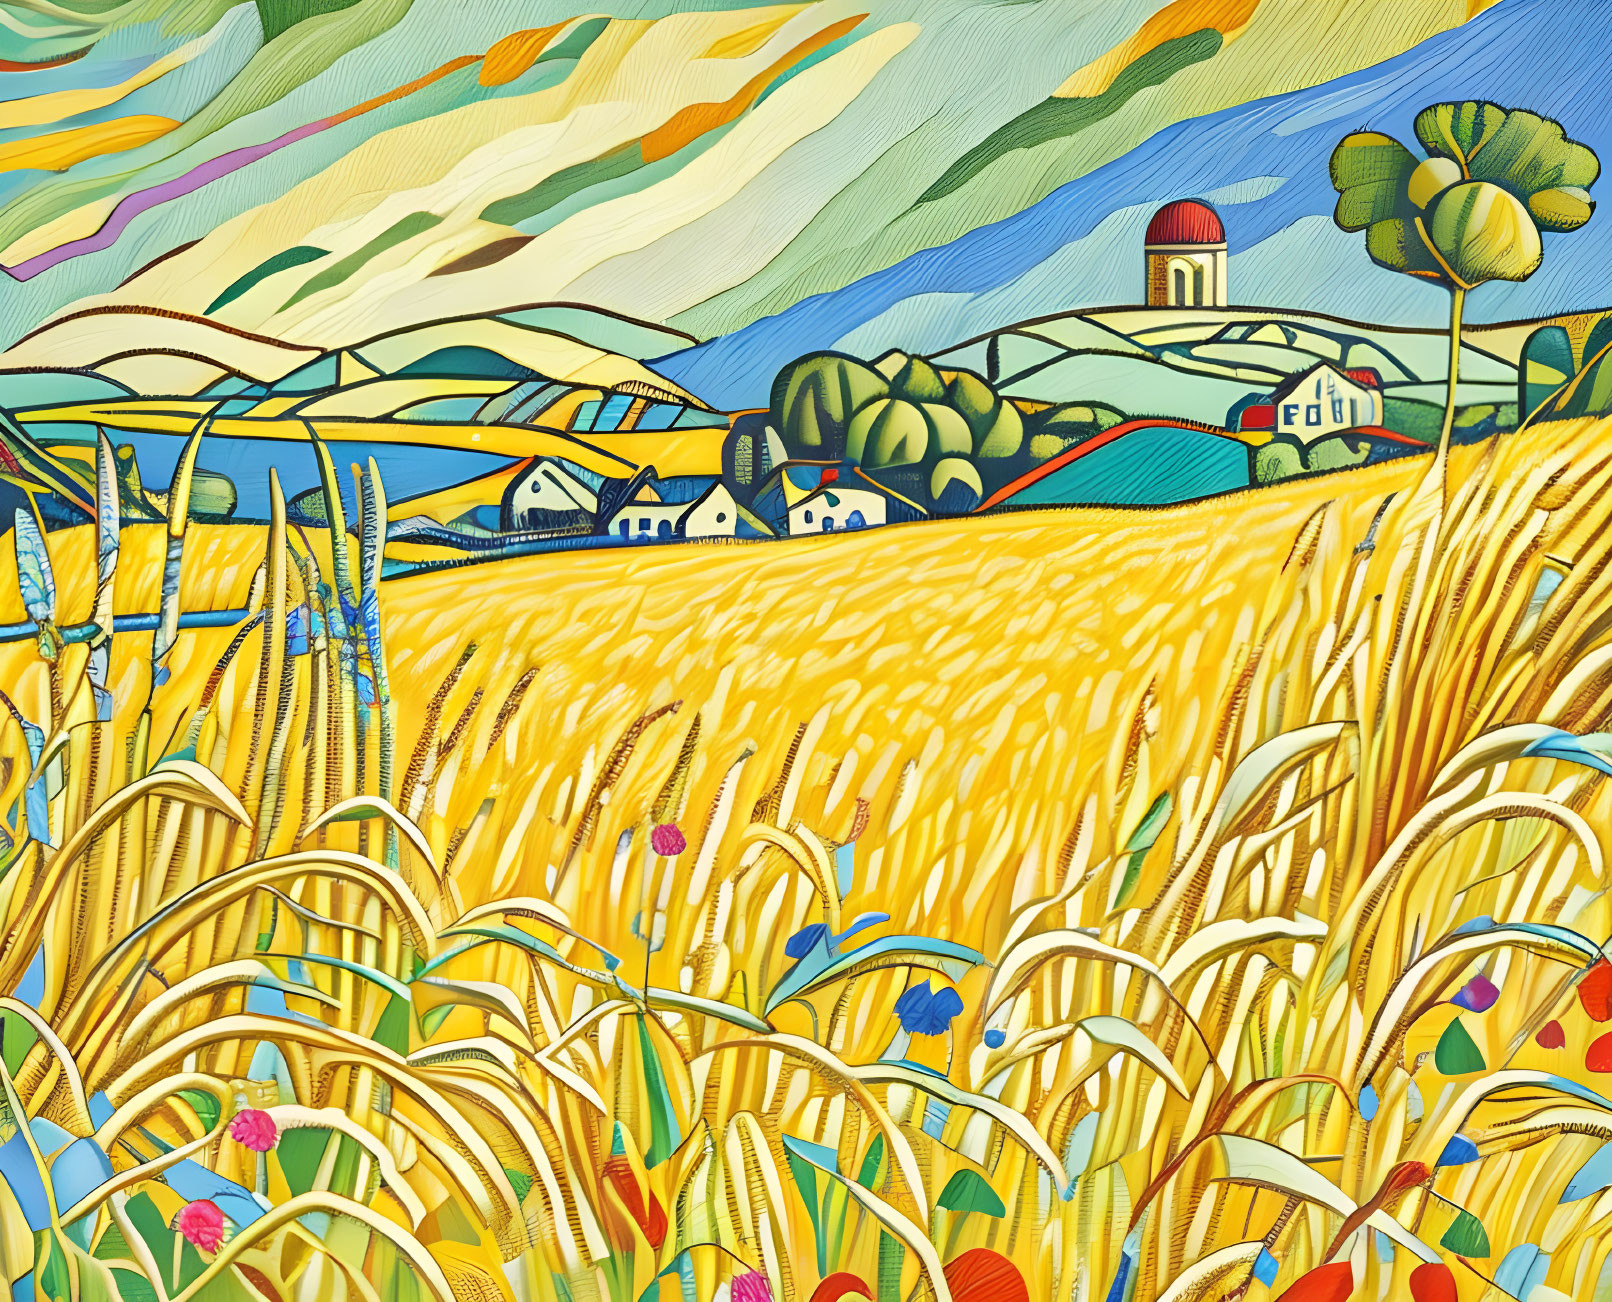 Colorful artwork of wheat field and countryside landscape under swirling sky